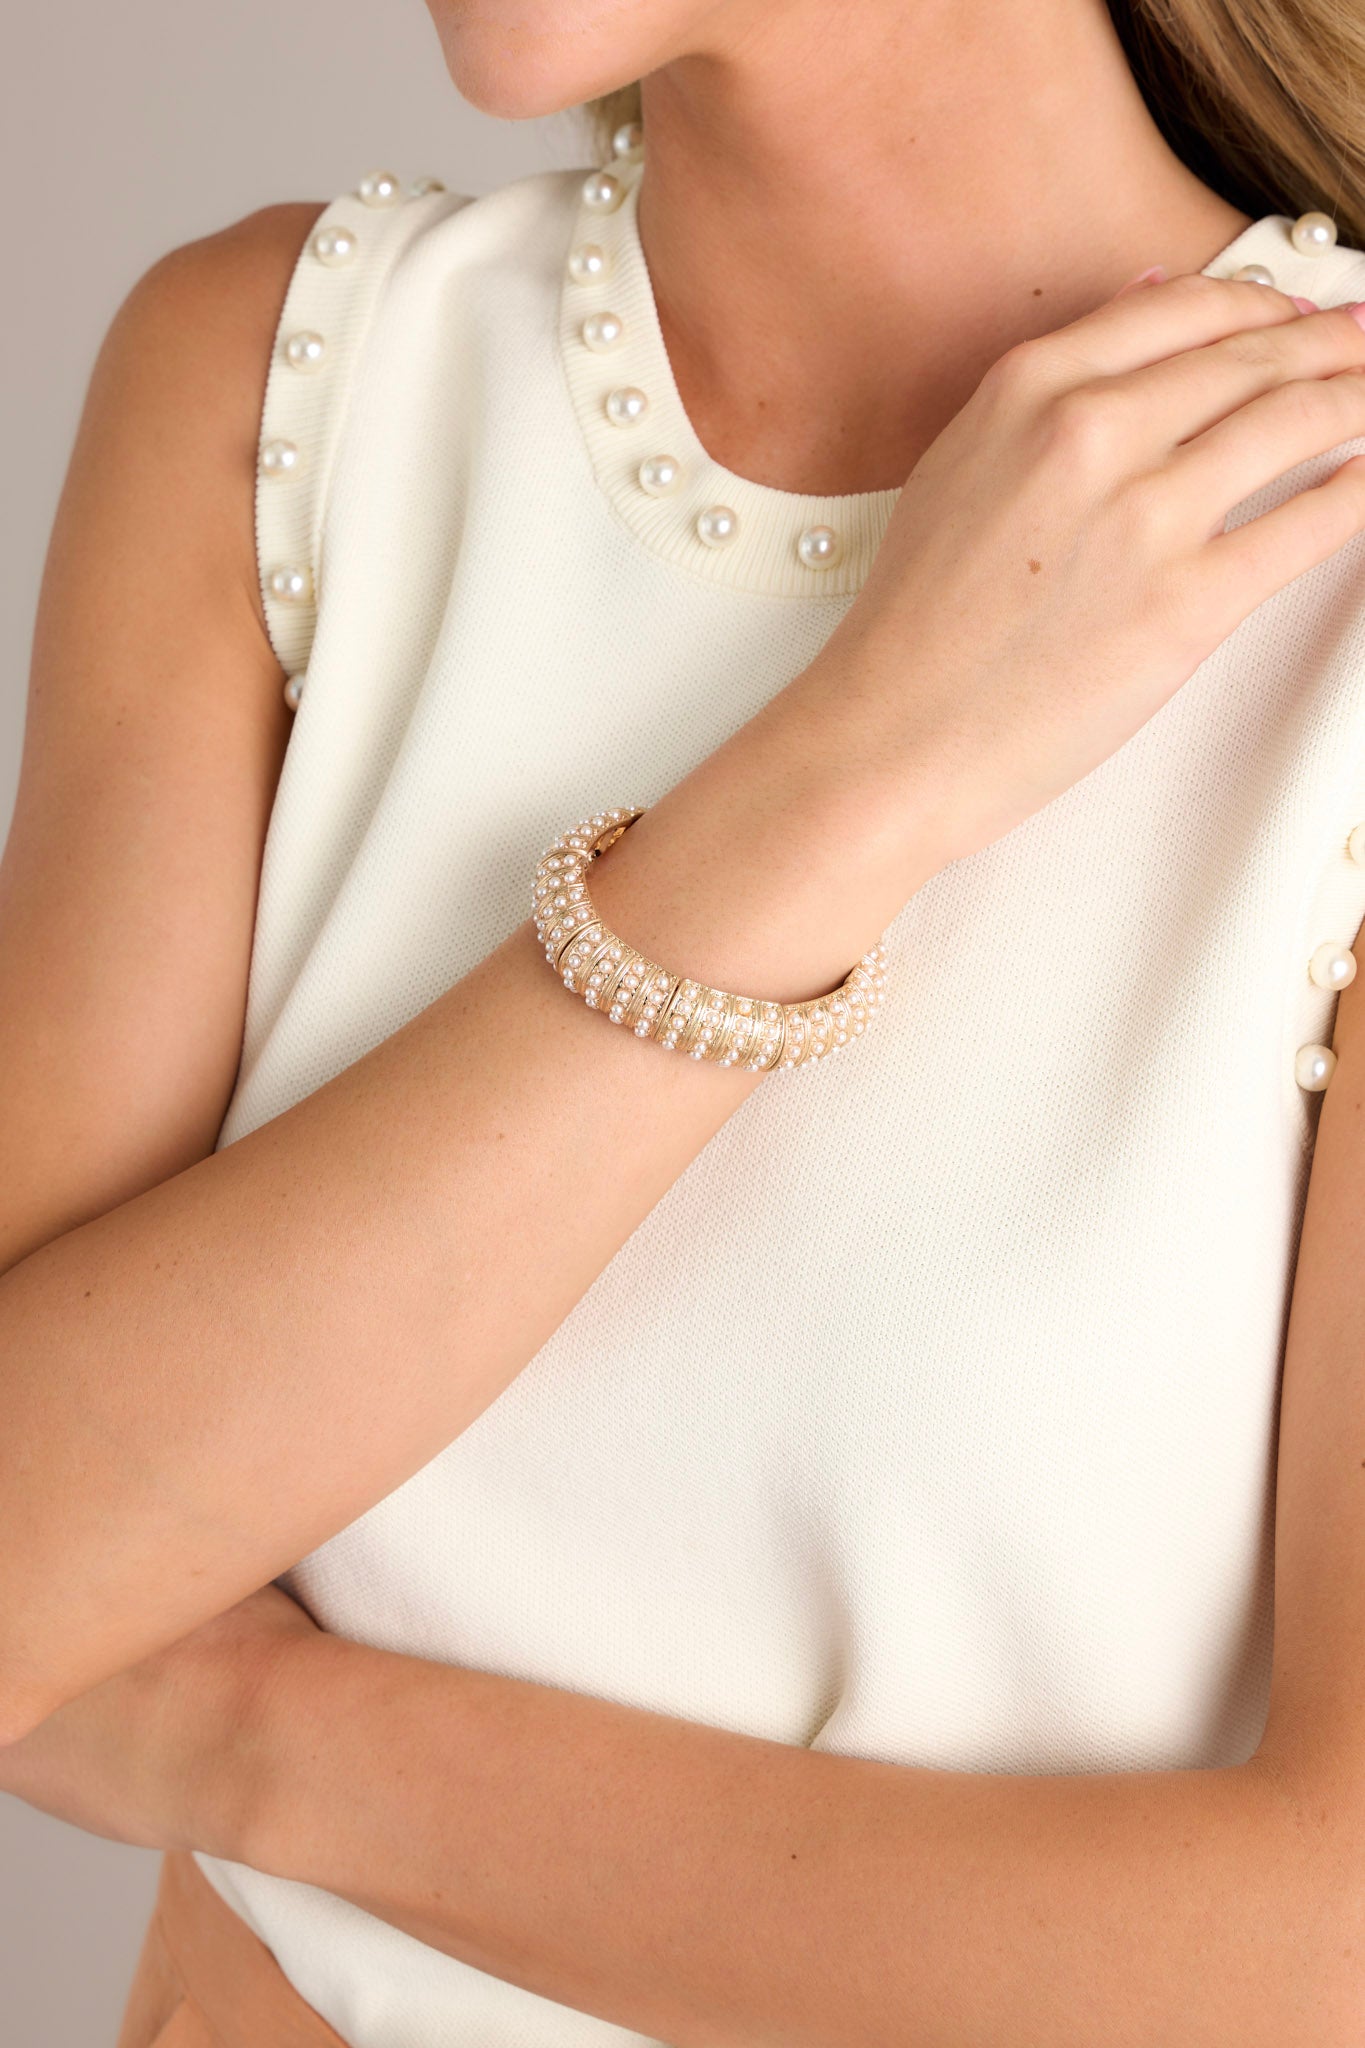 This gold bracelet is adorned with multiple small ivory faux pearls, and elastic bands underneath to accommodate stretch.